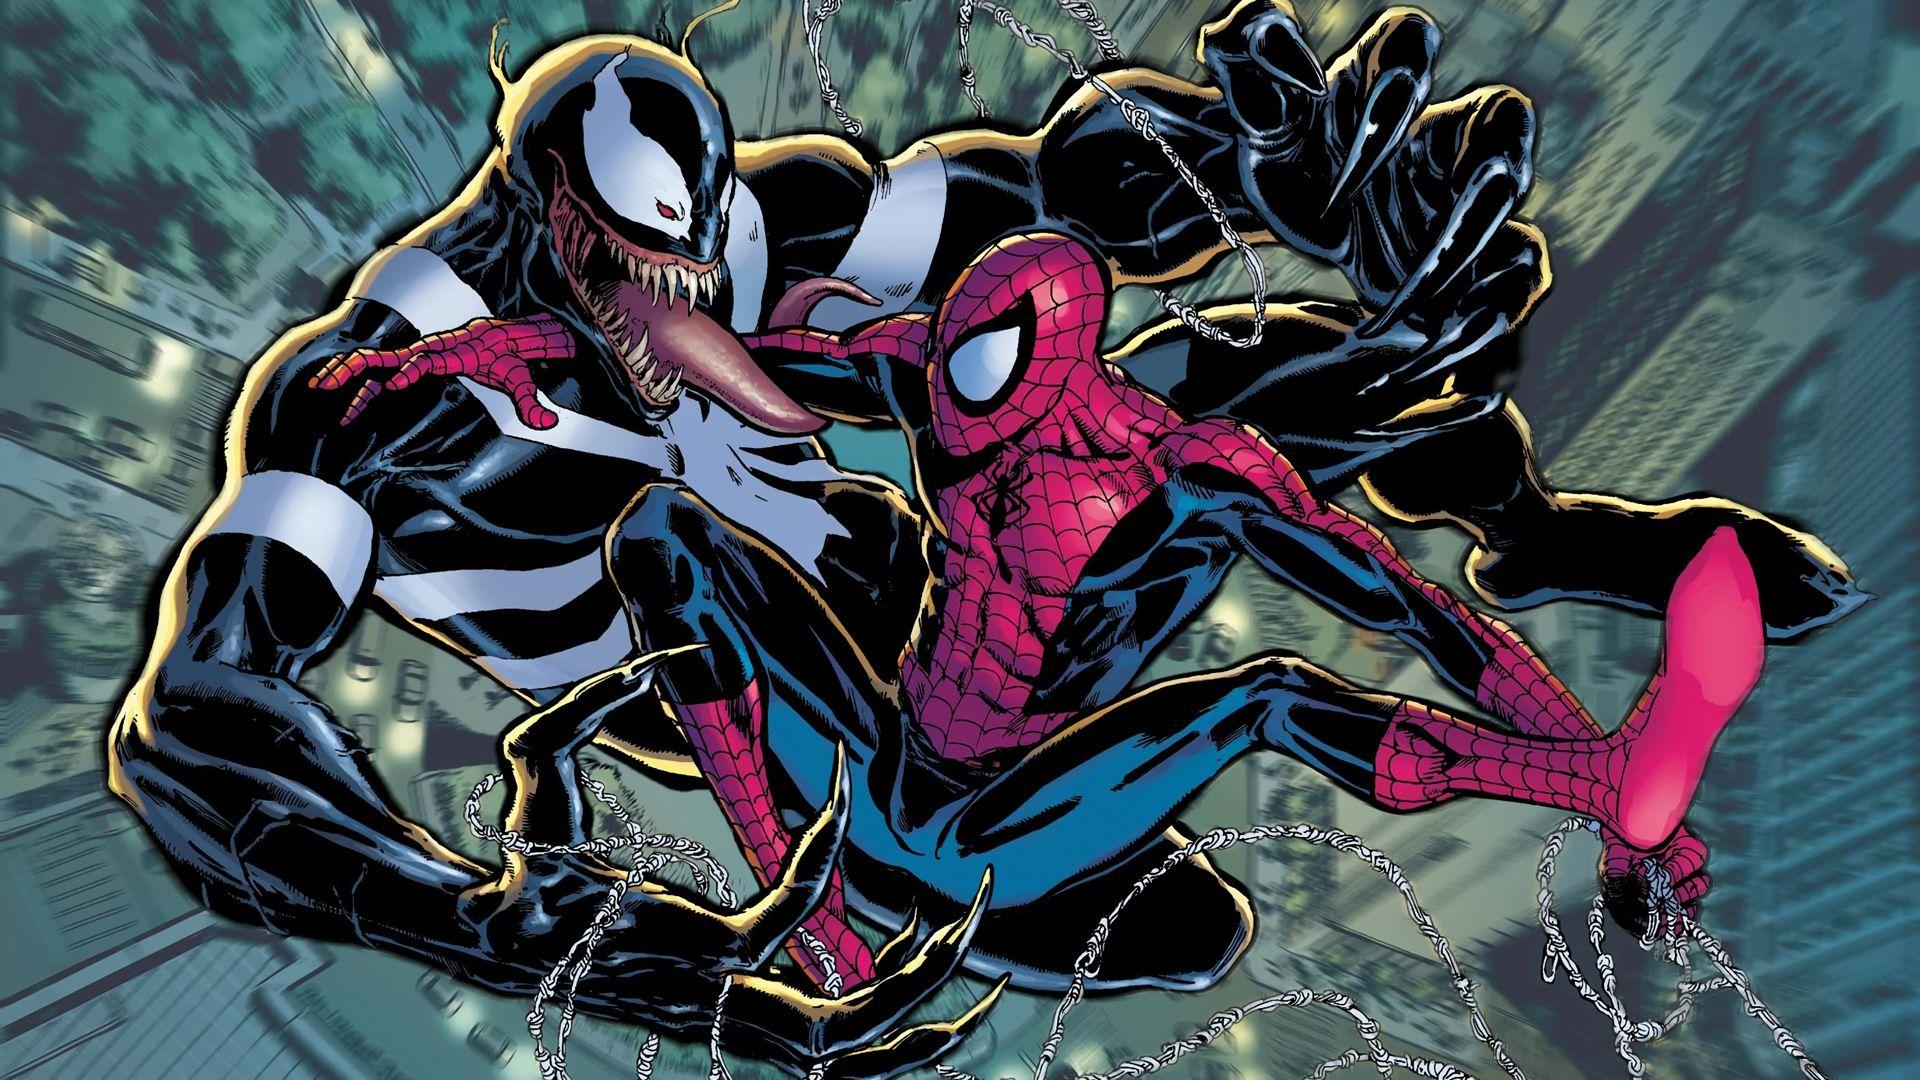 Venom vs Spiderman Full HD Wallpapers and Backgrounds Image.